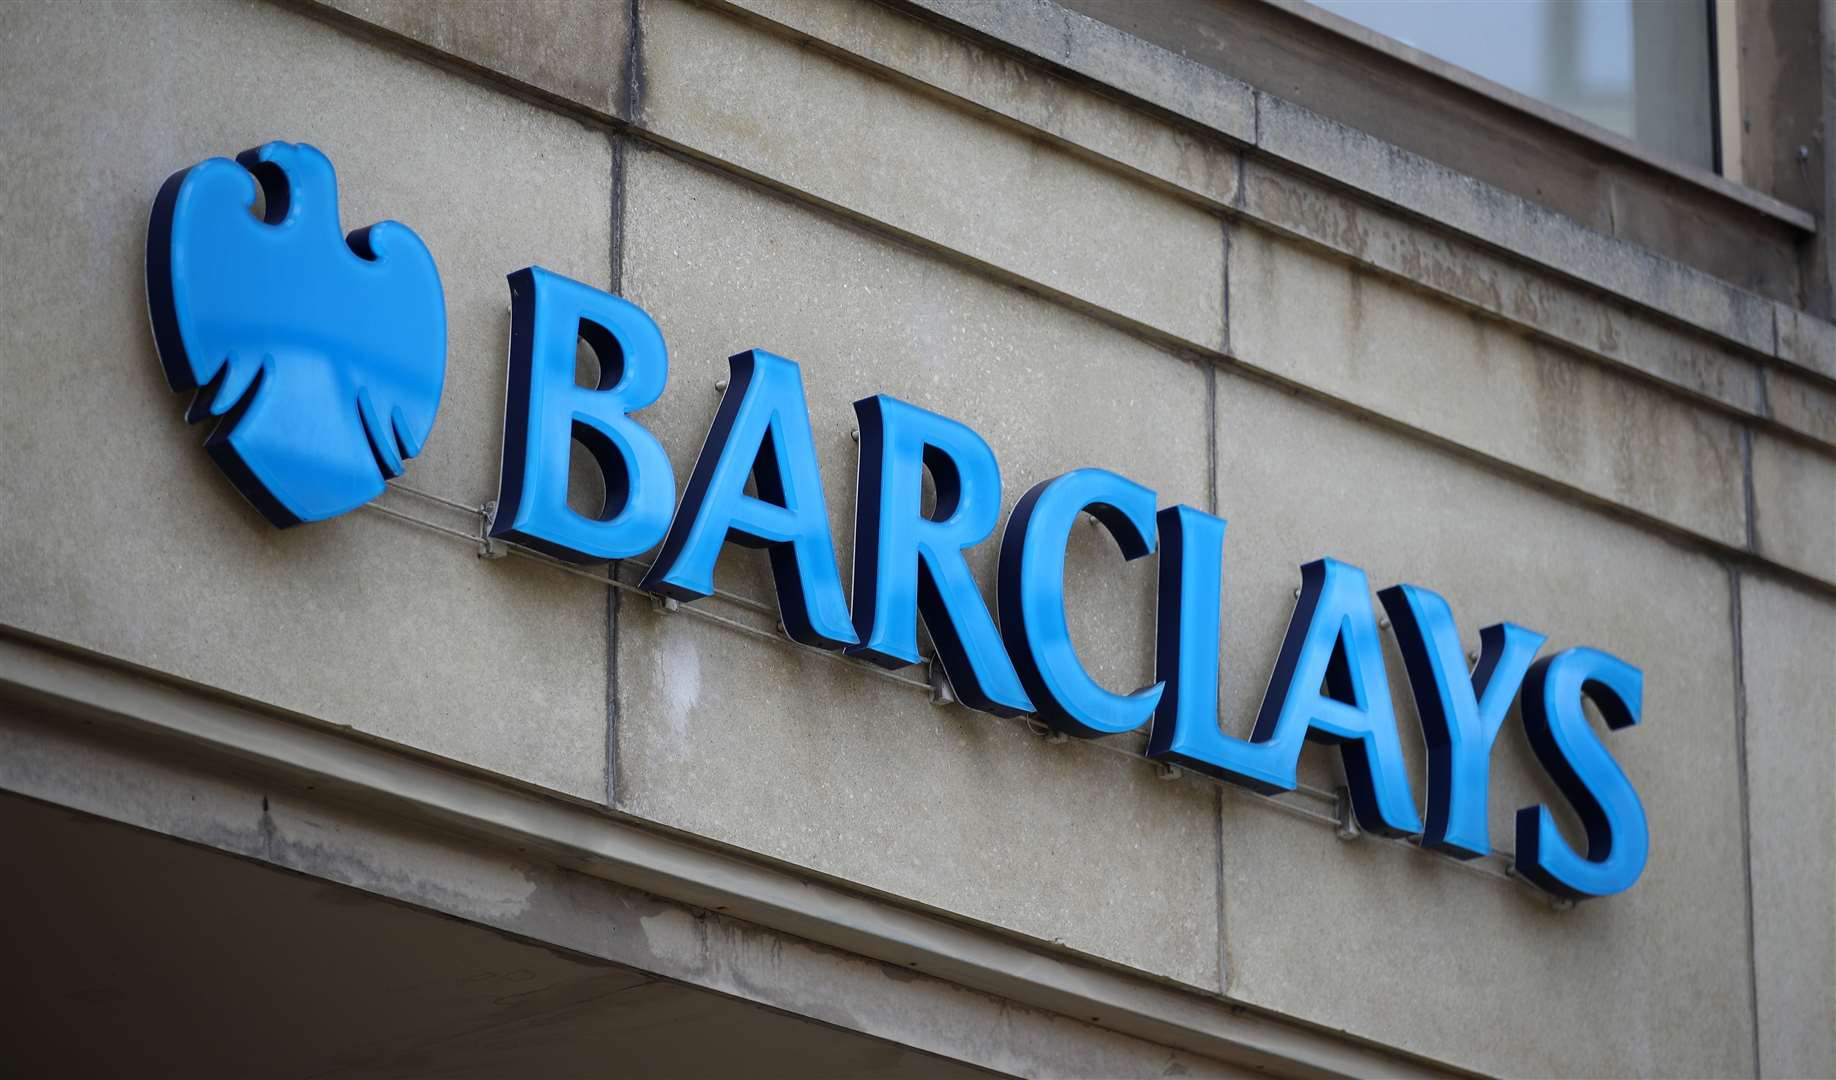 Barclays said the savings market has become ‘extremely competitive’ amid higher interest rates (Tim Goode/PA)